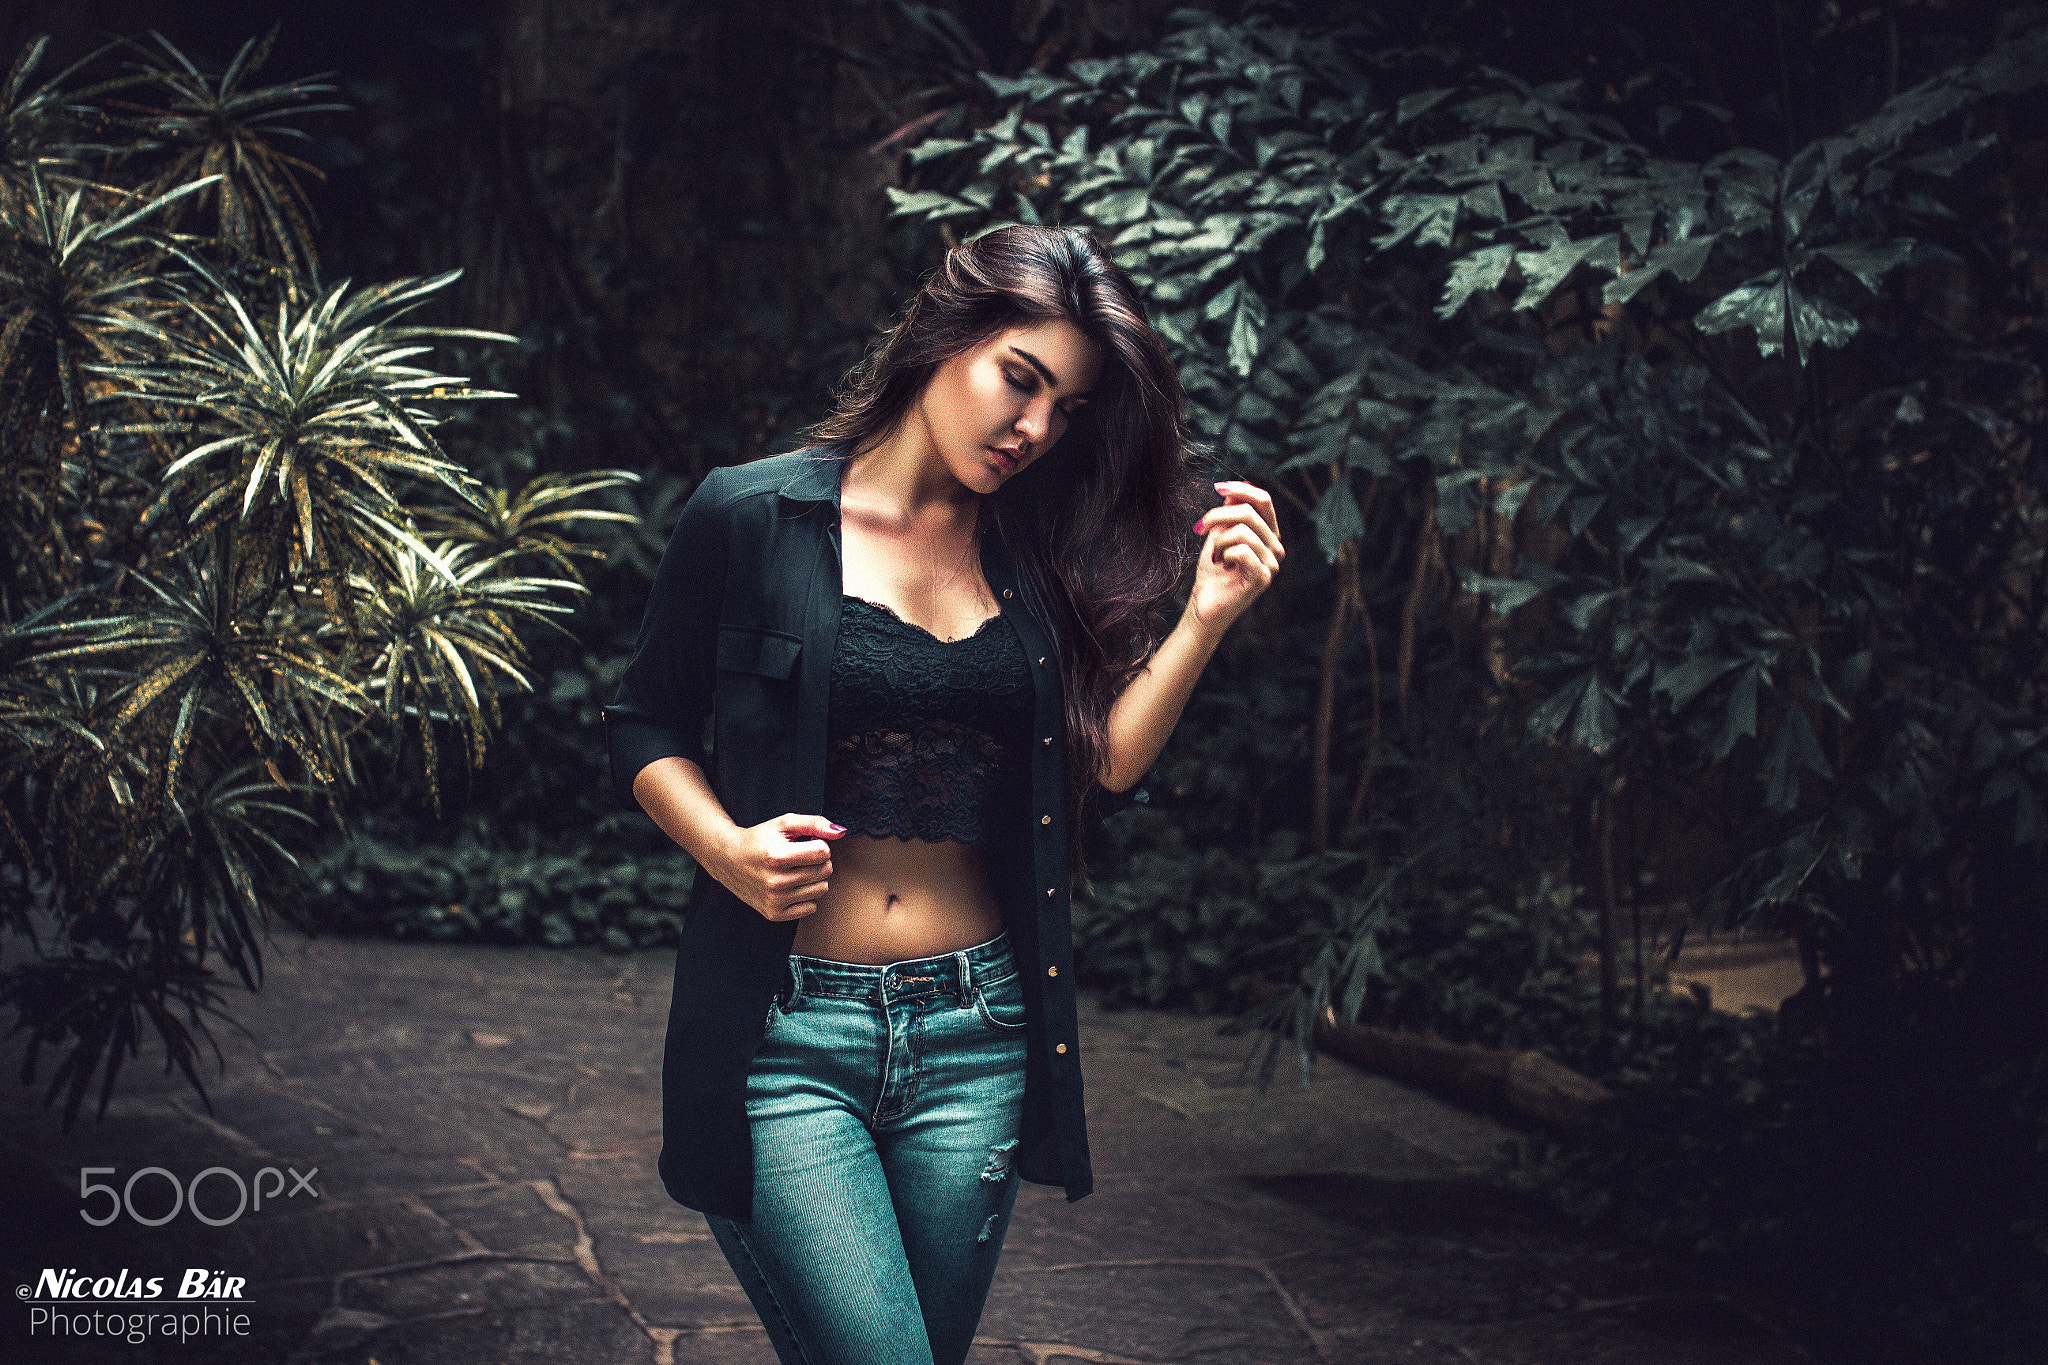 People 2048x1365 women jeans belly portrait closed eyes red nails women outdoors tanned Nicolas Bar black bras Nicolas Bär 500px